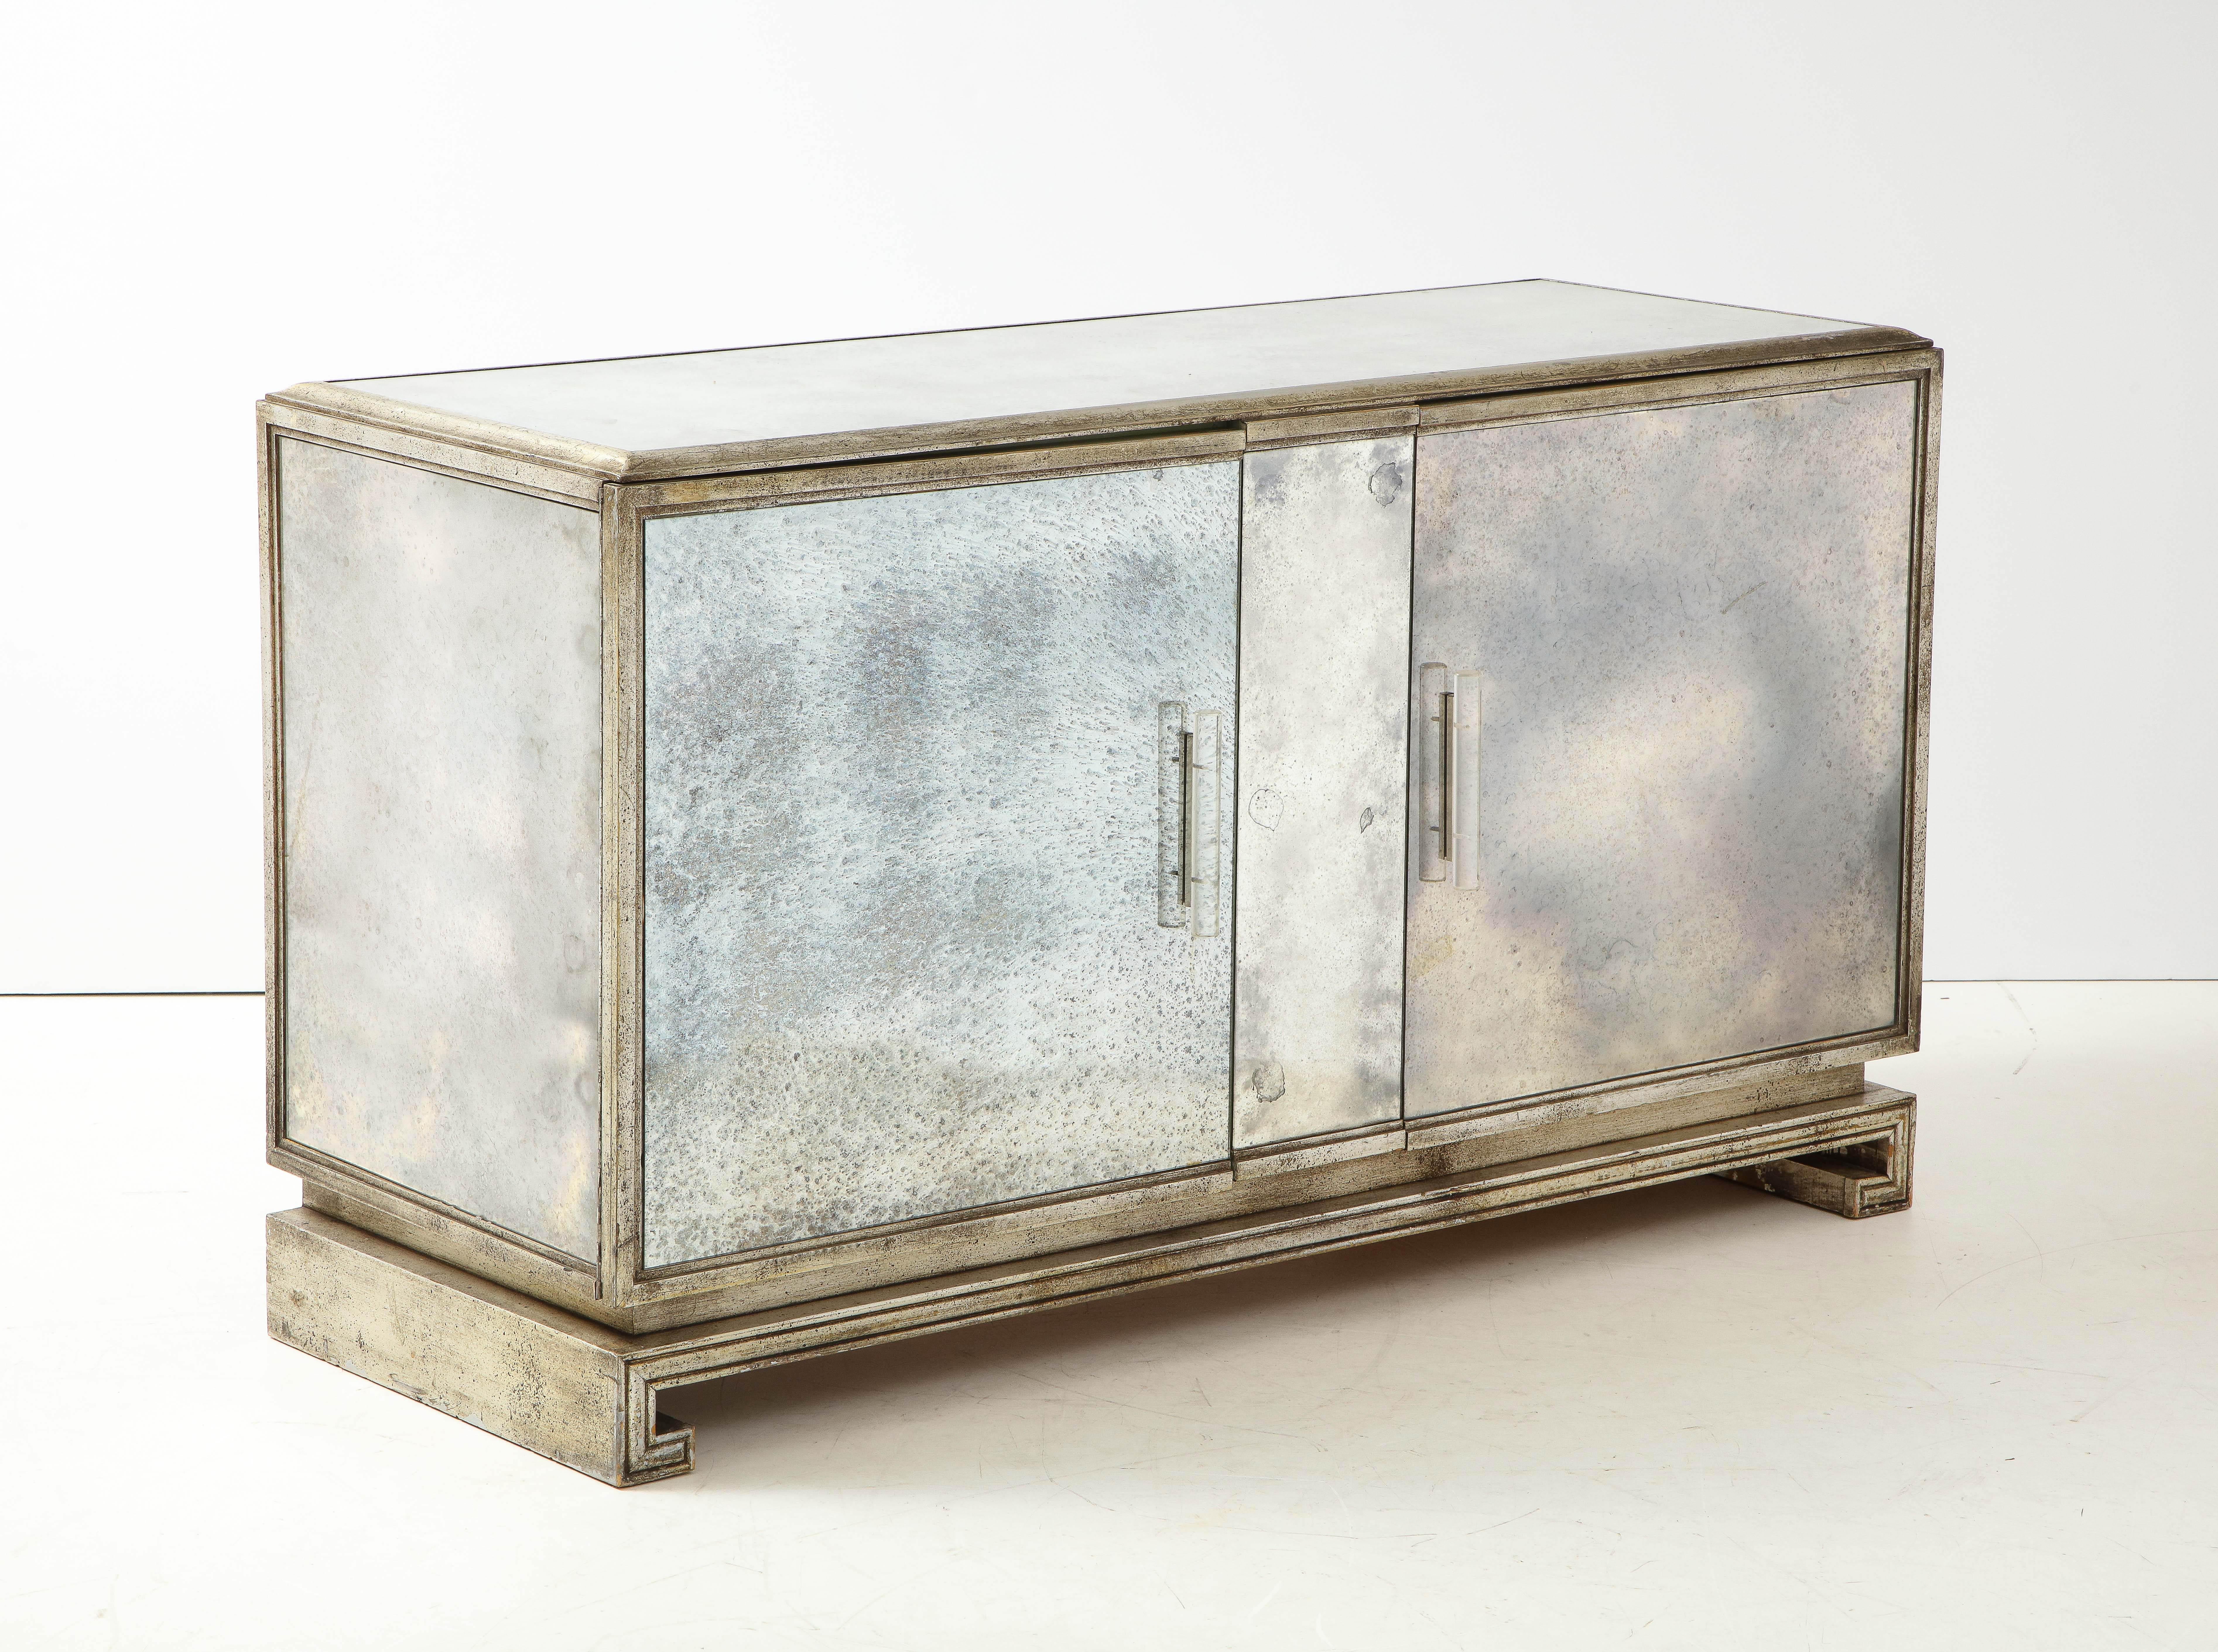 Mid-20th Century Vintage  Mirrored Sideboard / Credenza By Grrosfield House For Sale